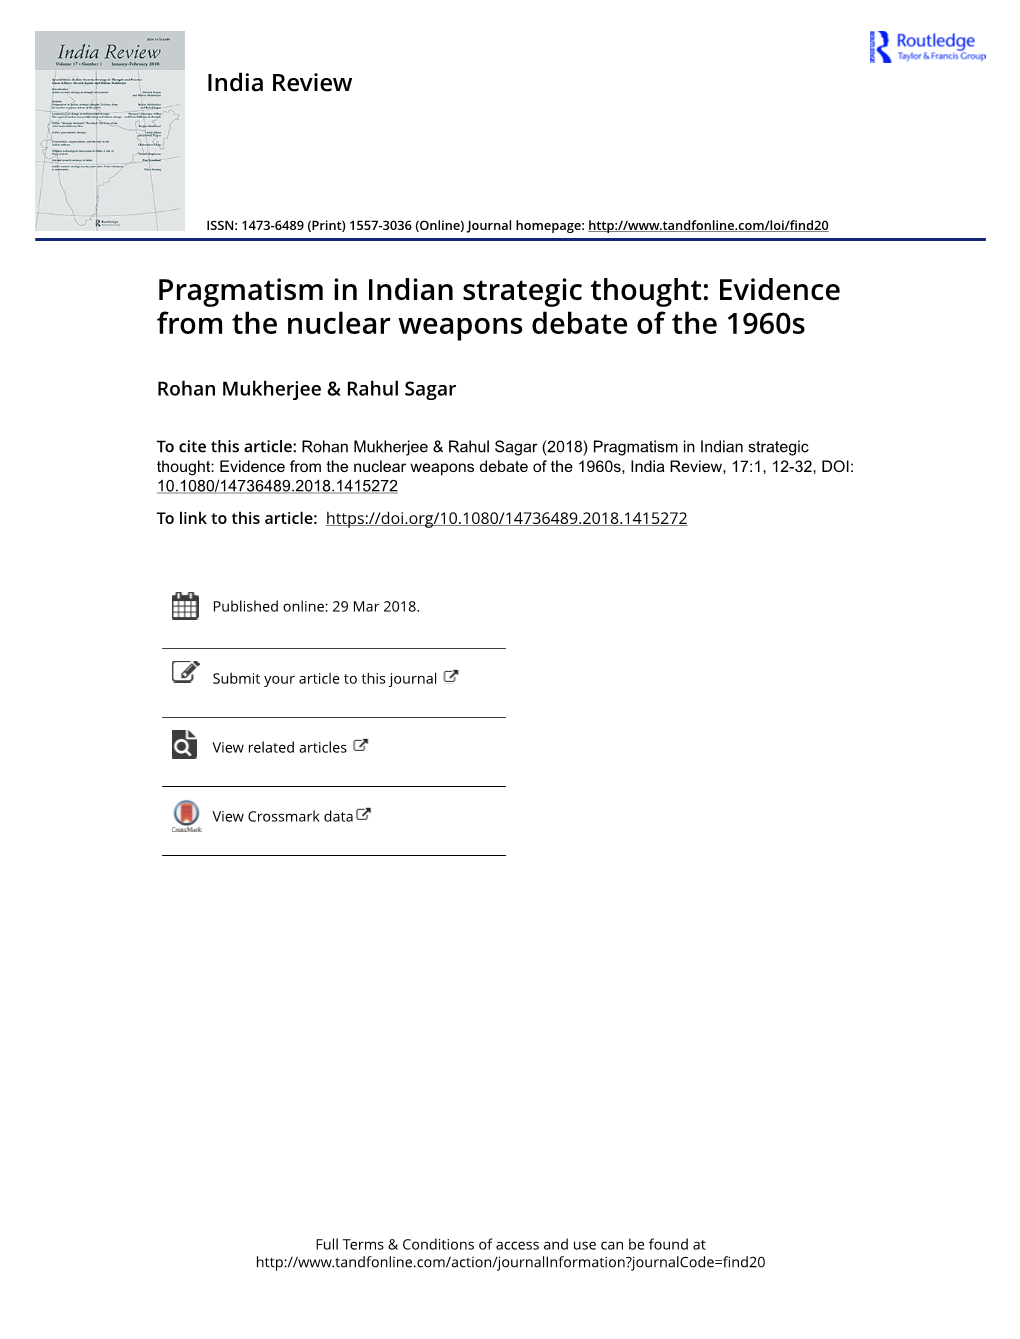 Pragmatism in Indian Strategic Thought: Evidence from the Nuclear Weapons Debate of the 1960S